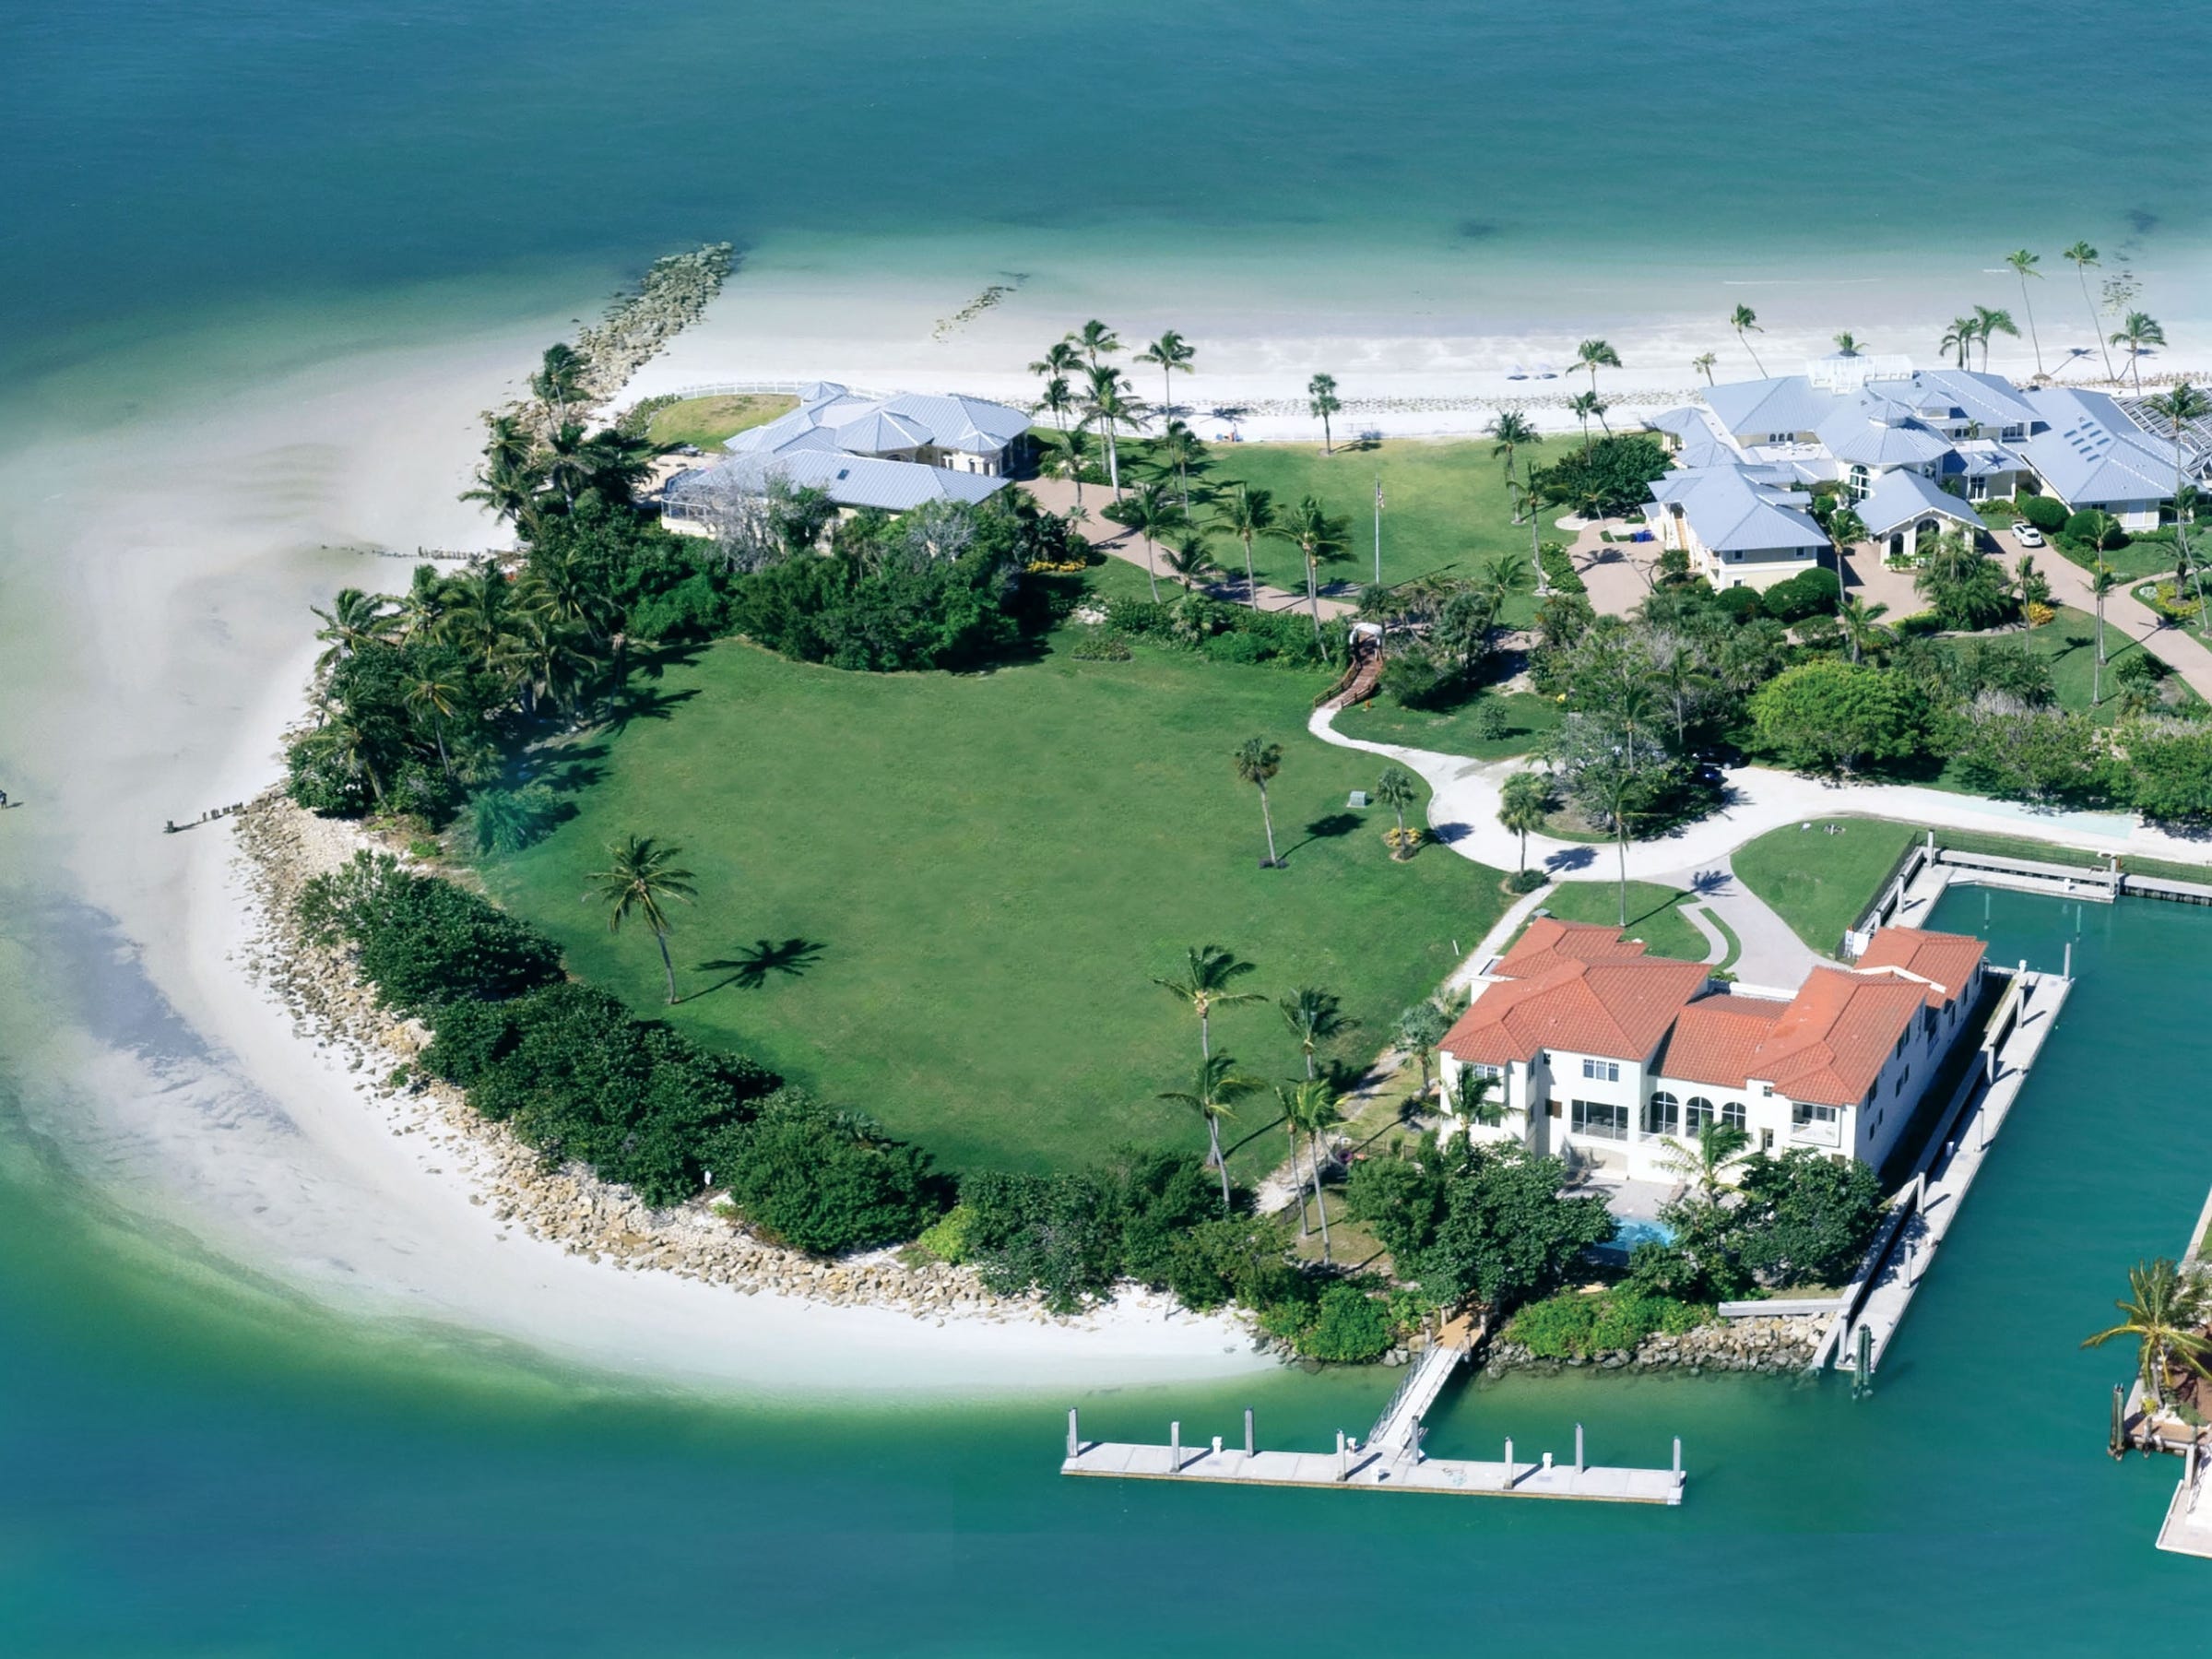 the-most-expensive-property-for-sale-in-the-us-is-a-florida-compound-where-a-late-investing-mogul-gathered-hundreds-of-his-family-members